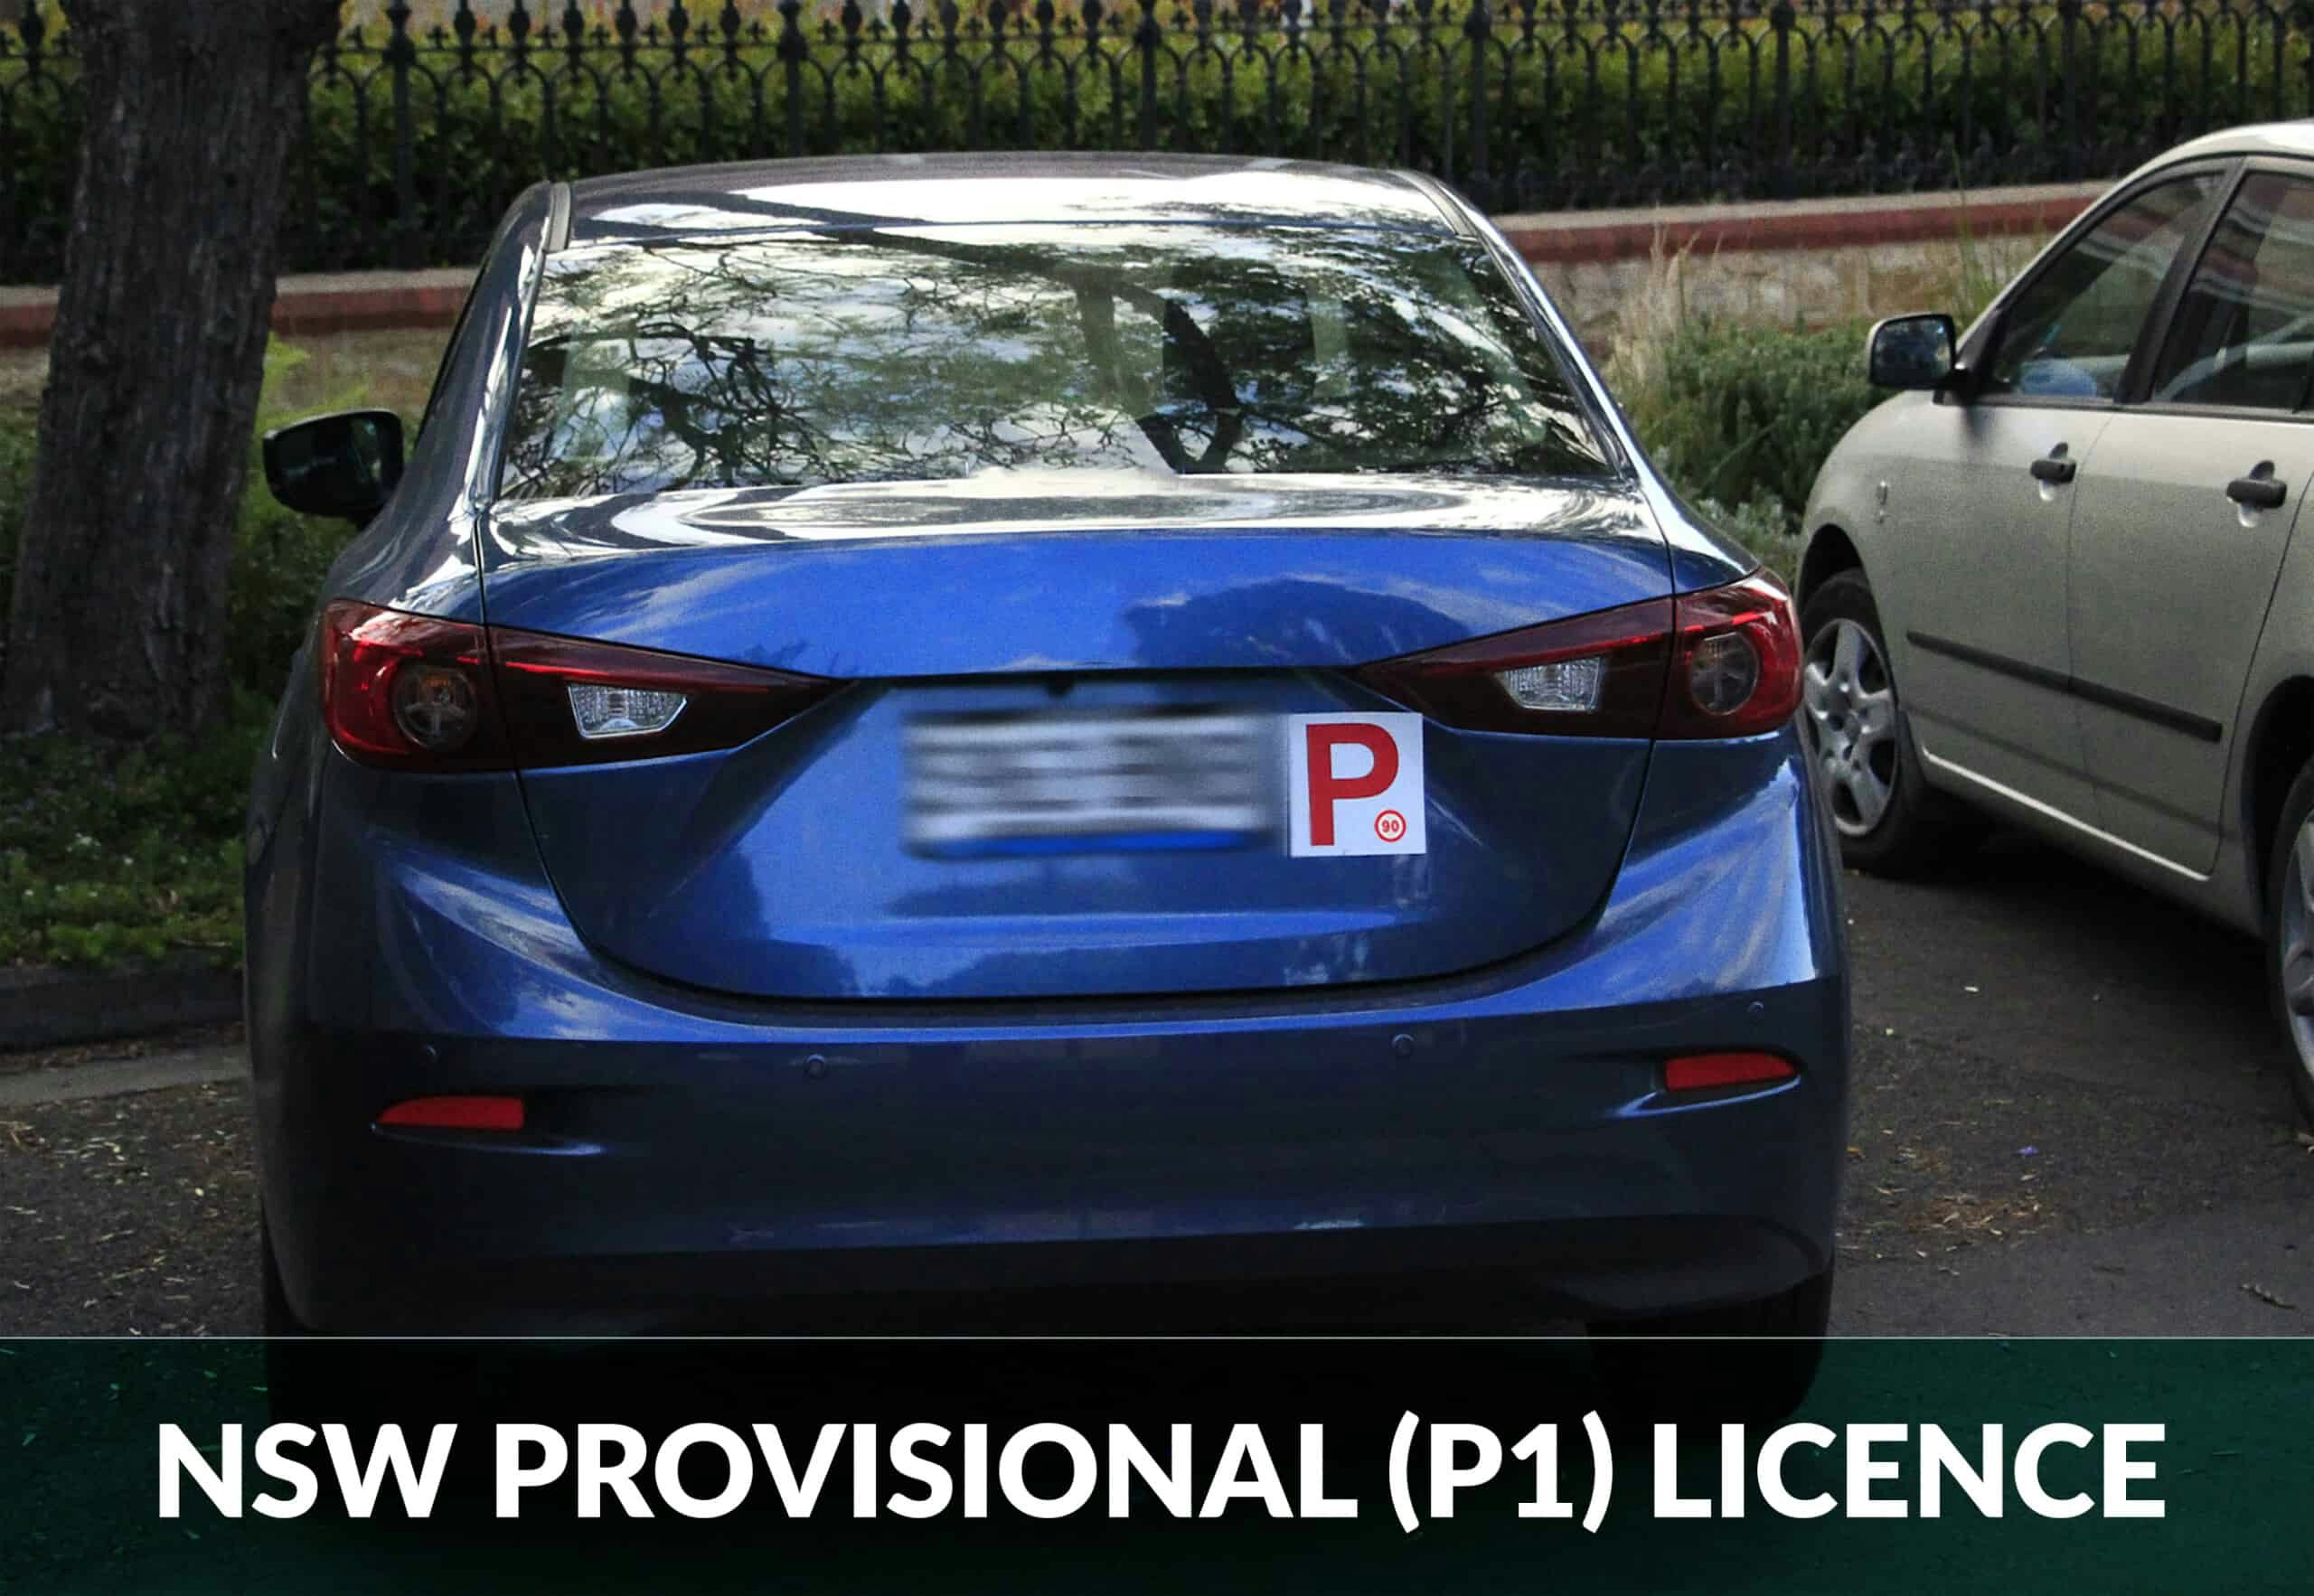 NSW Provisional p1 Licence